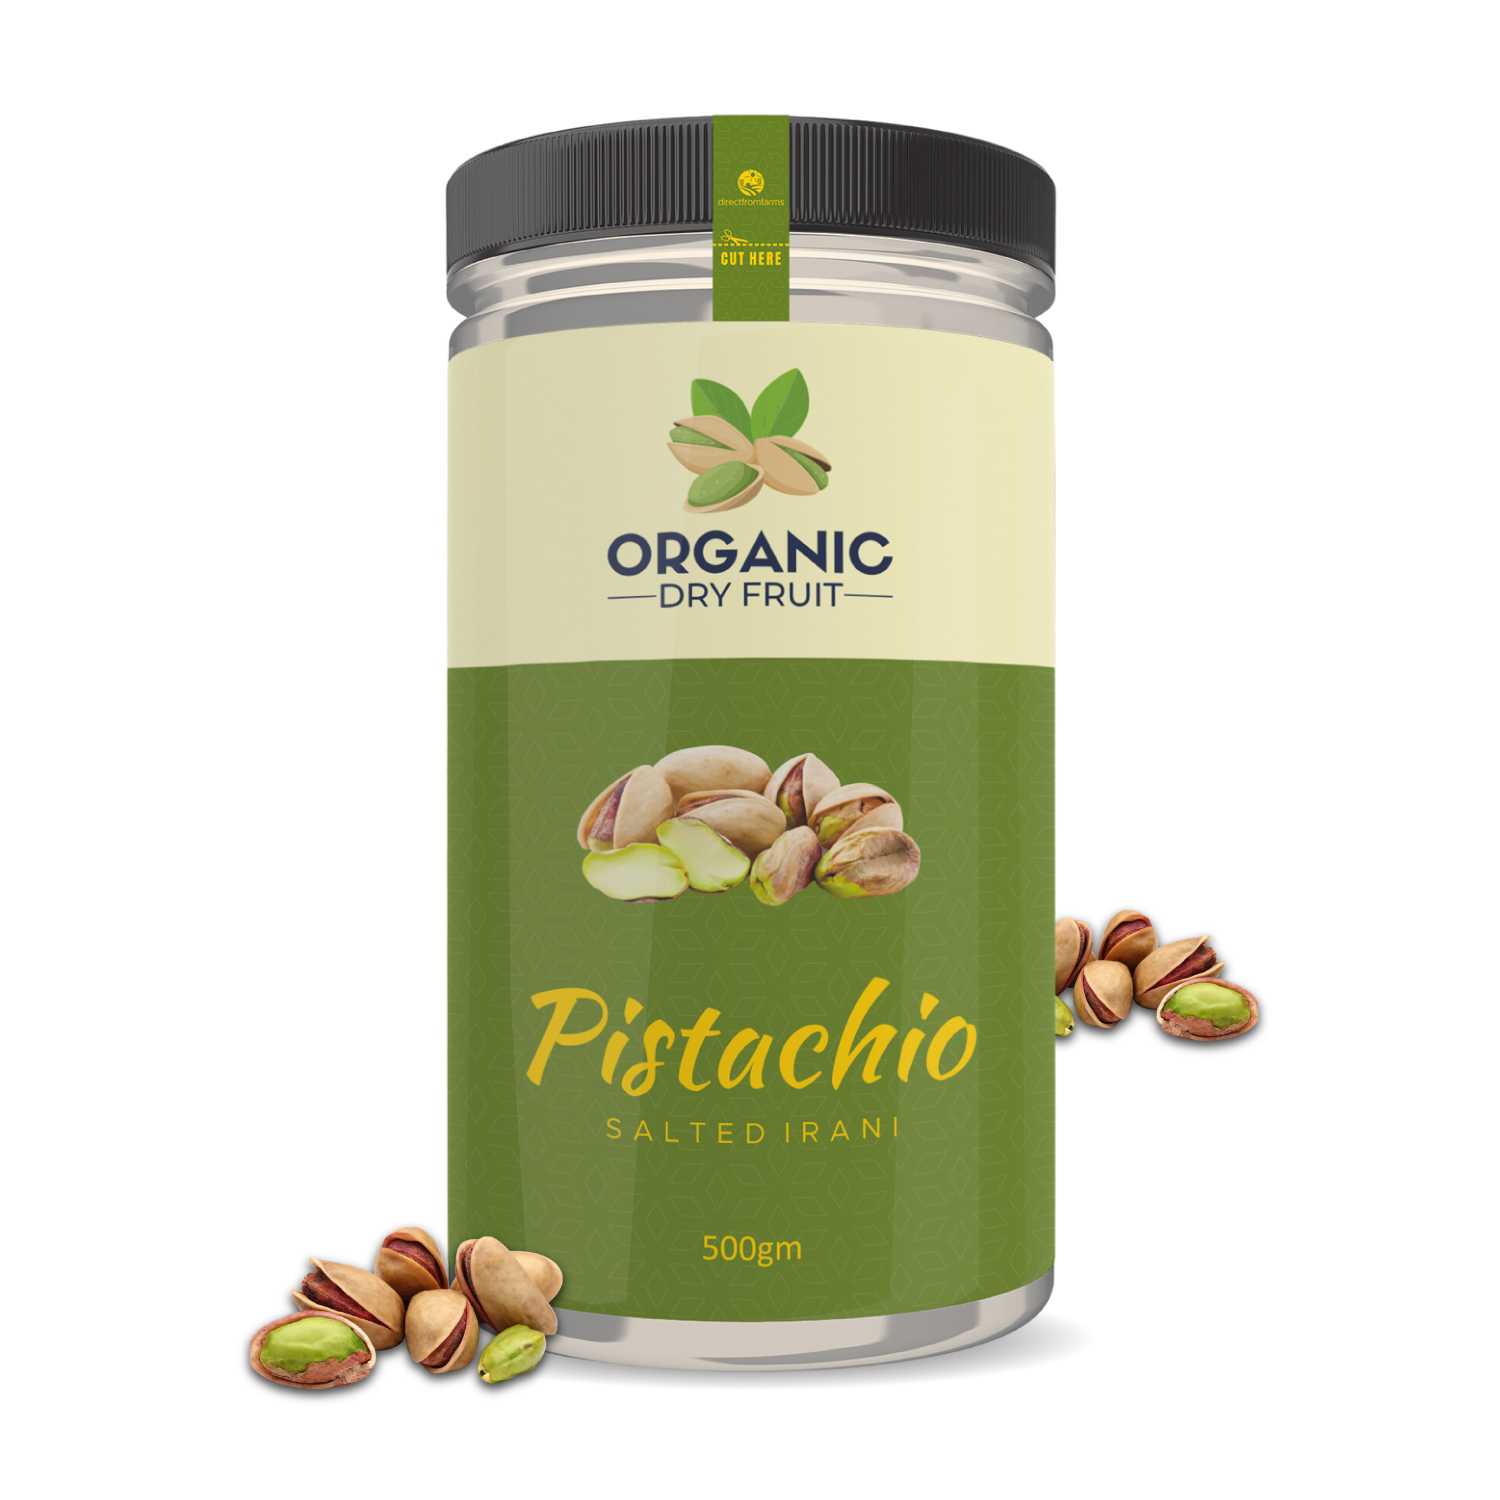 Organic Dry Fruit Roasted & Salted Pistachios